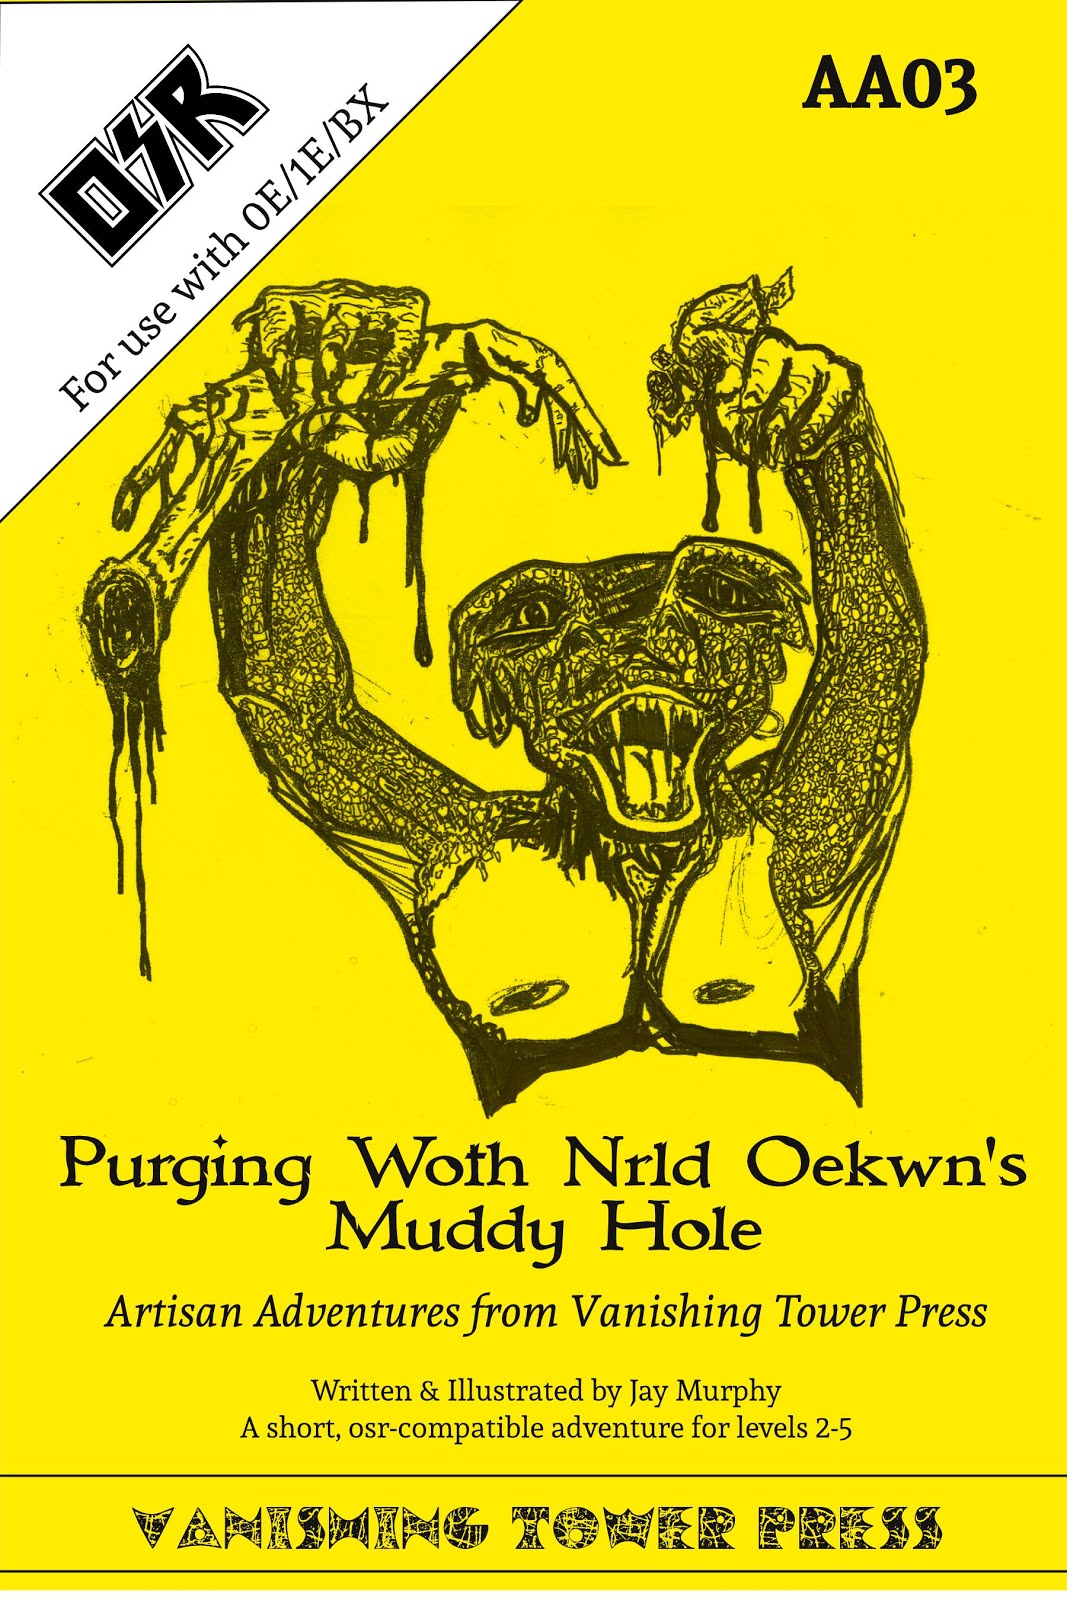 AA03 Purging Woth nrld Oekwyn's Muddy Hole now On Sale!